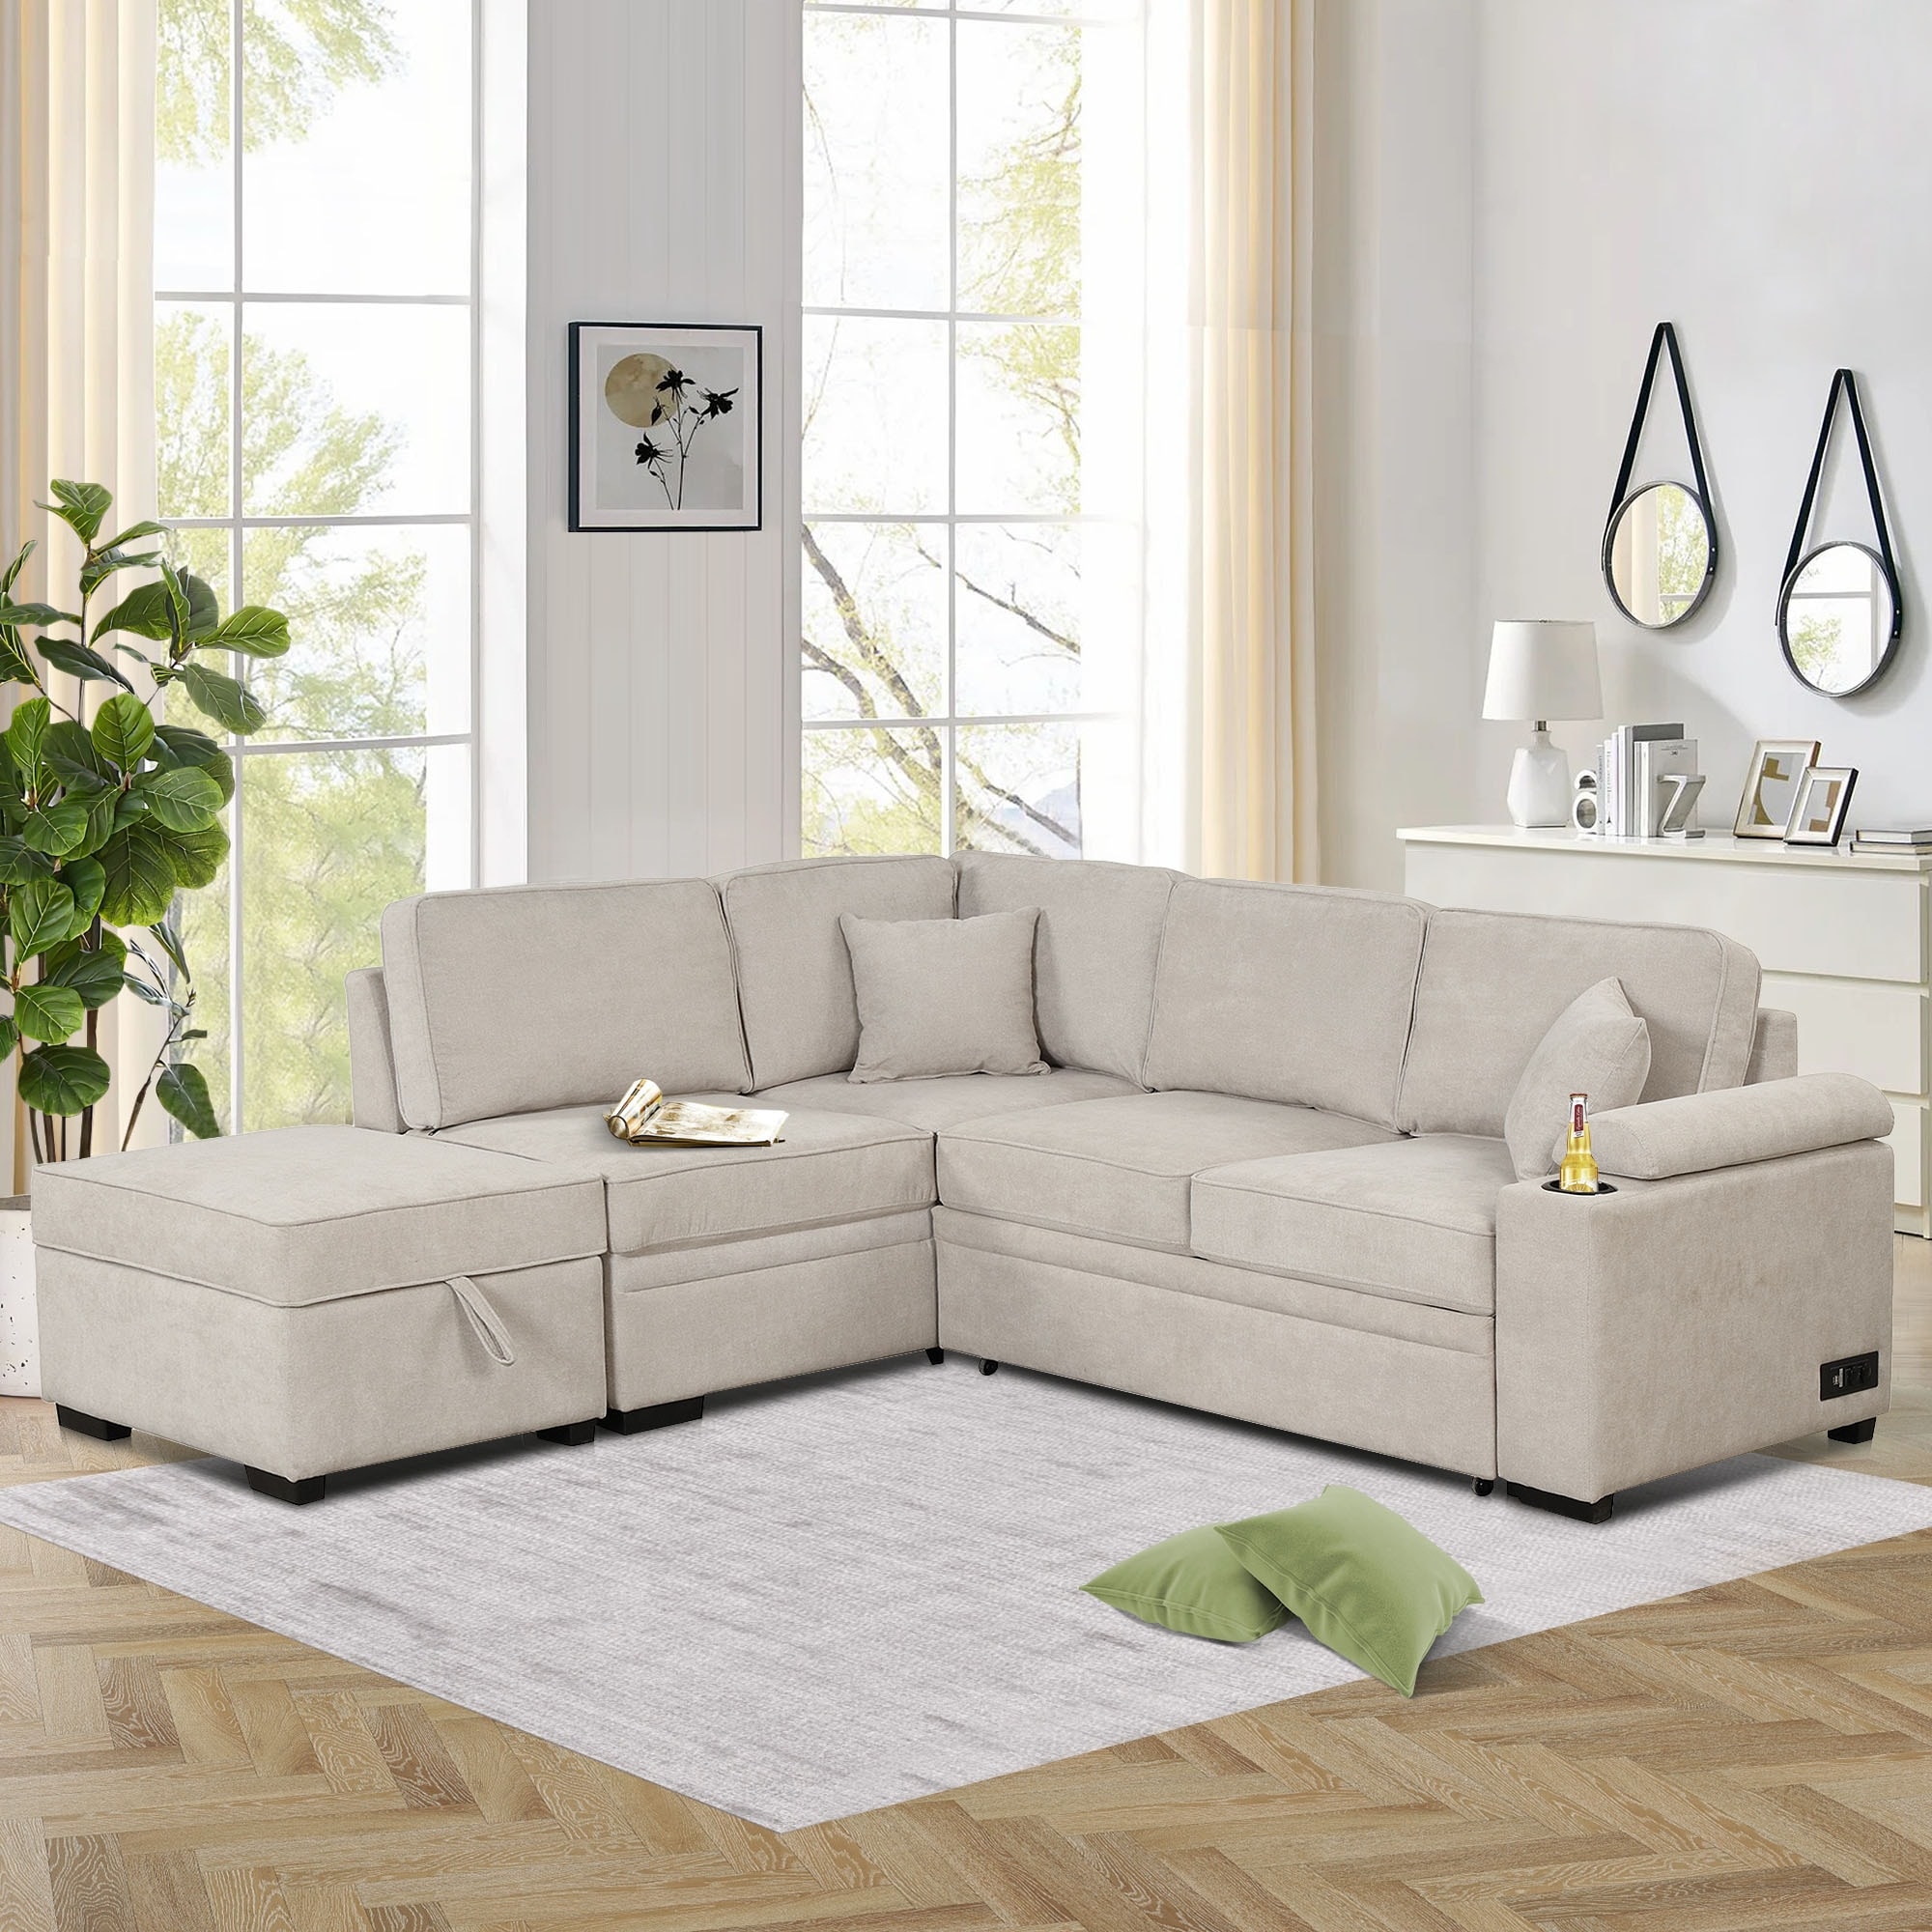 Tilbagetrækning Gnaven Beroligende middel 87.4" L Shape Sleeper Sectional Sofa, 2 in 1 Pull Out Sofa Bed Couch with  Storage Ottoman for Living Room and Small Apartment - Bed Bath & Beyond -  37685966